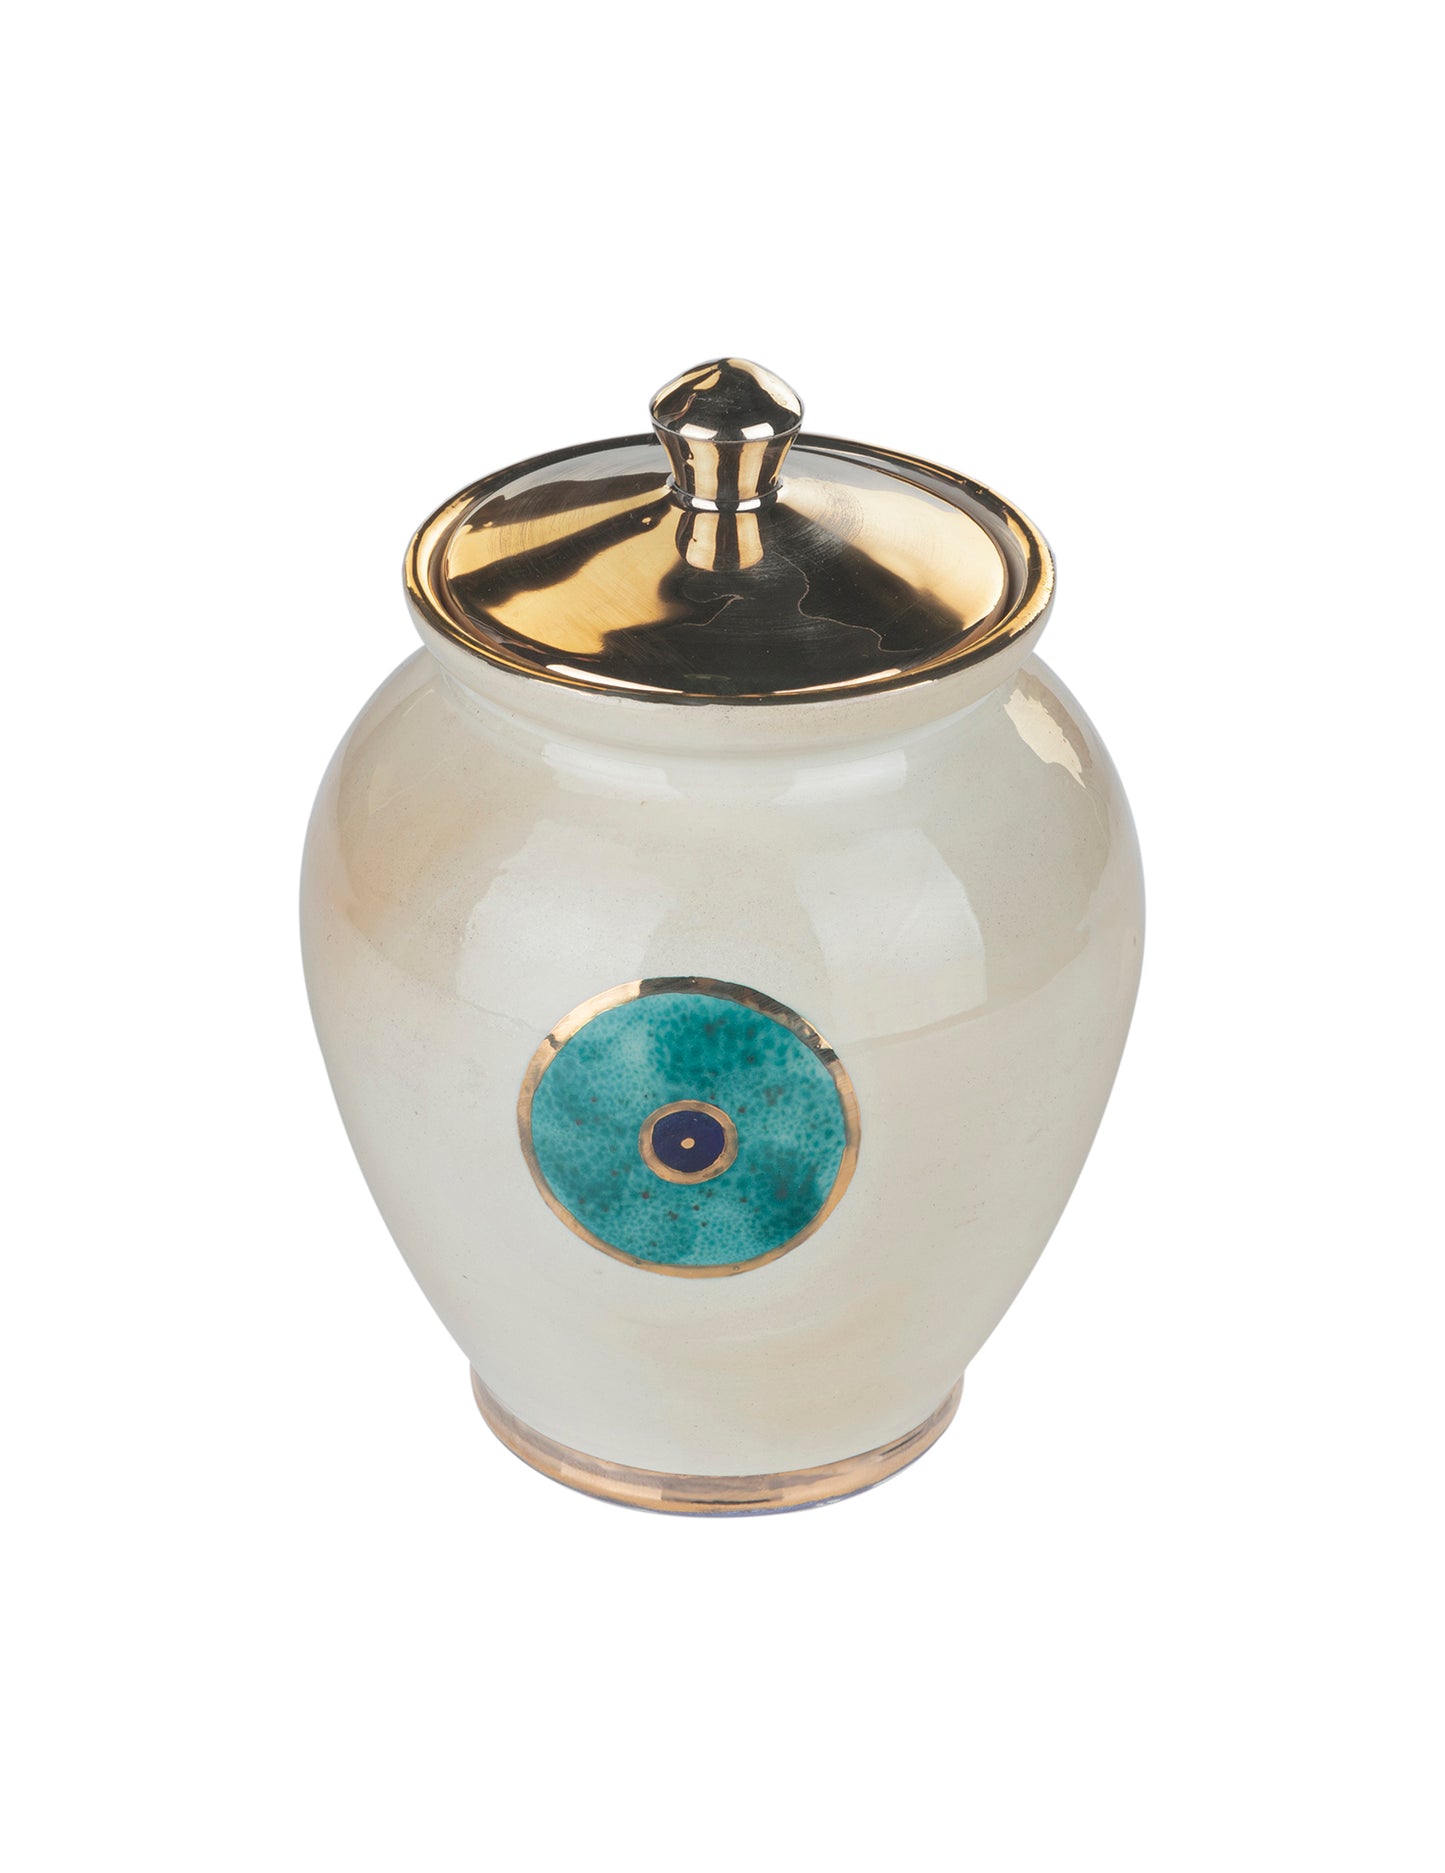 Evil Eye Candy/Sugar box With a 11k Gold Plated lid